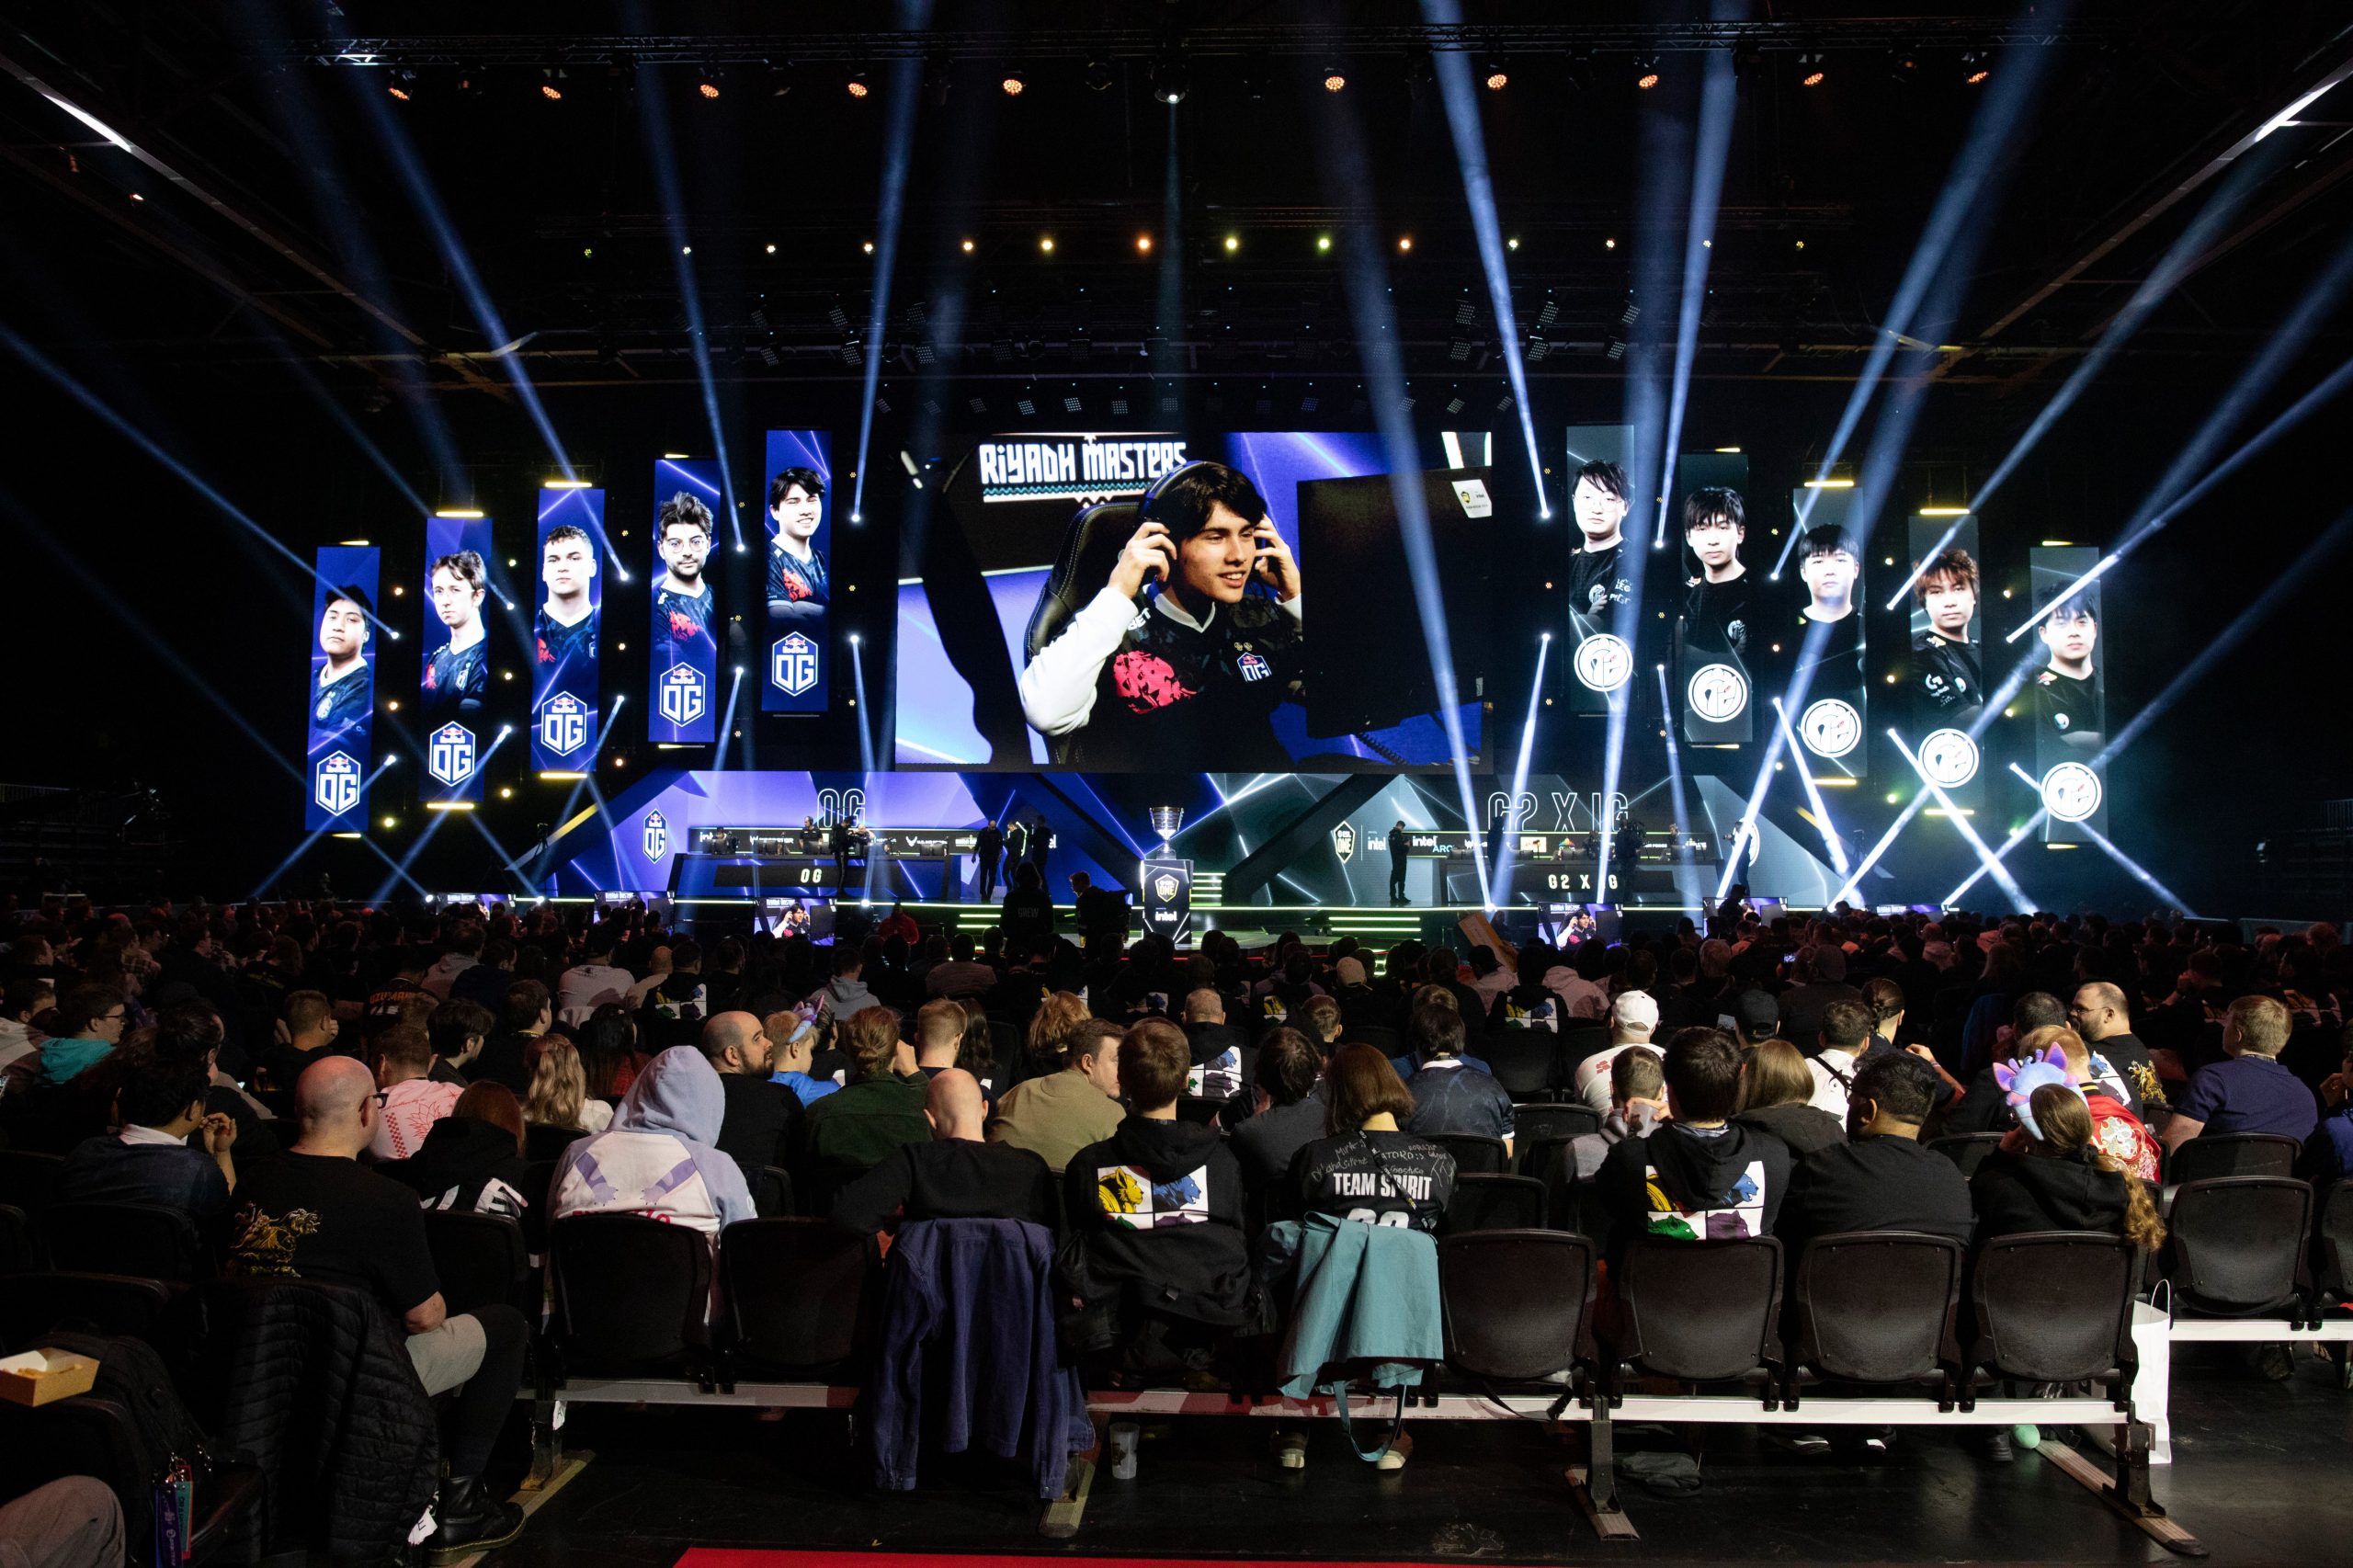 Professional teams competed on stage at ESL One Birmingham, the international esports tournament at the city’s Resorts World arena